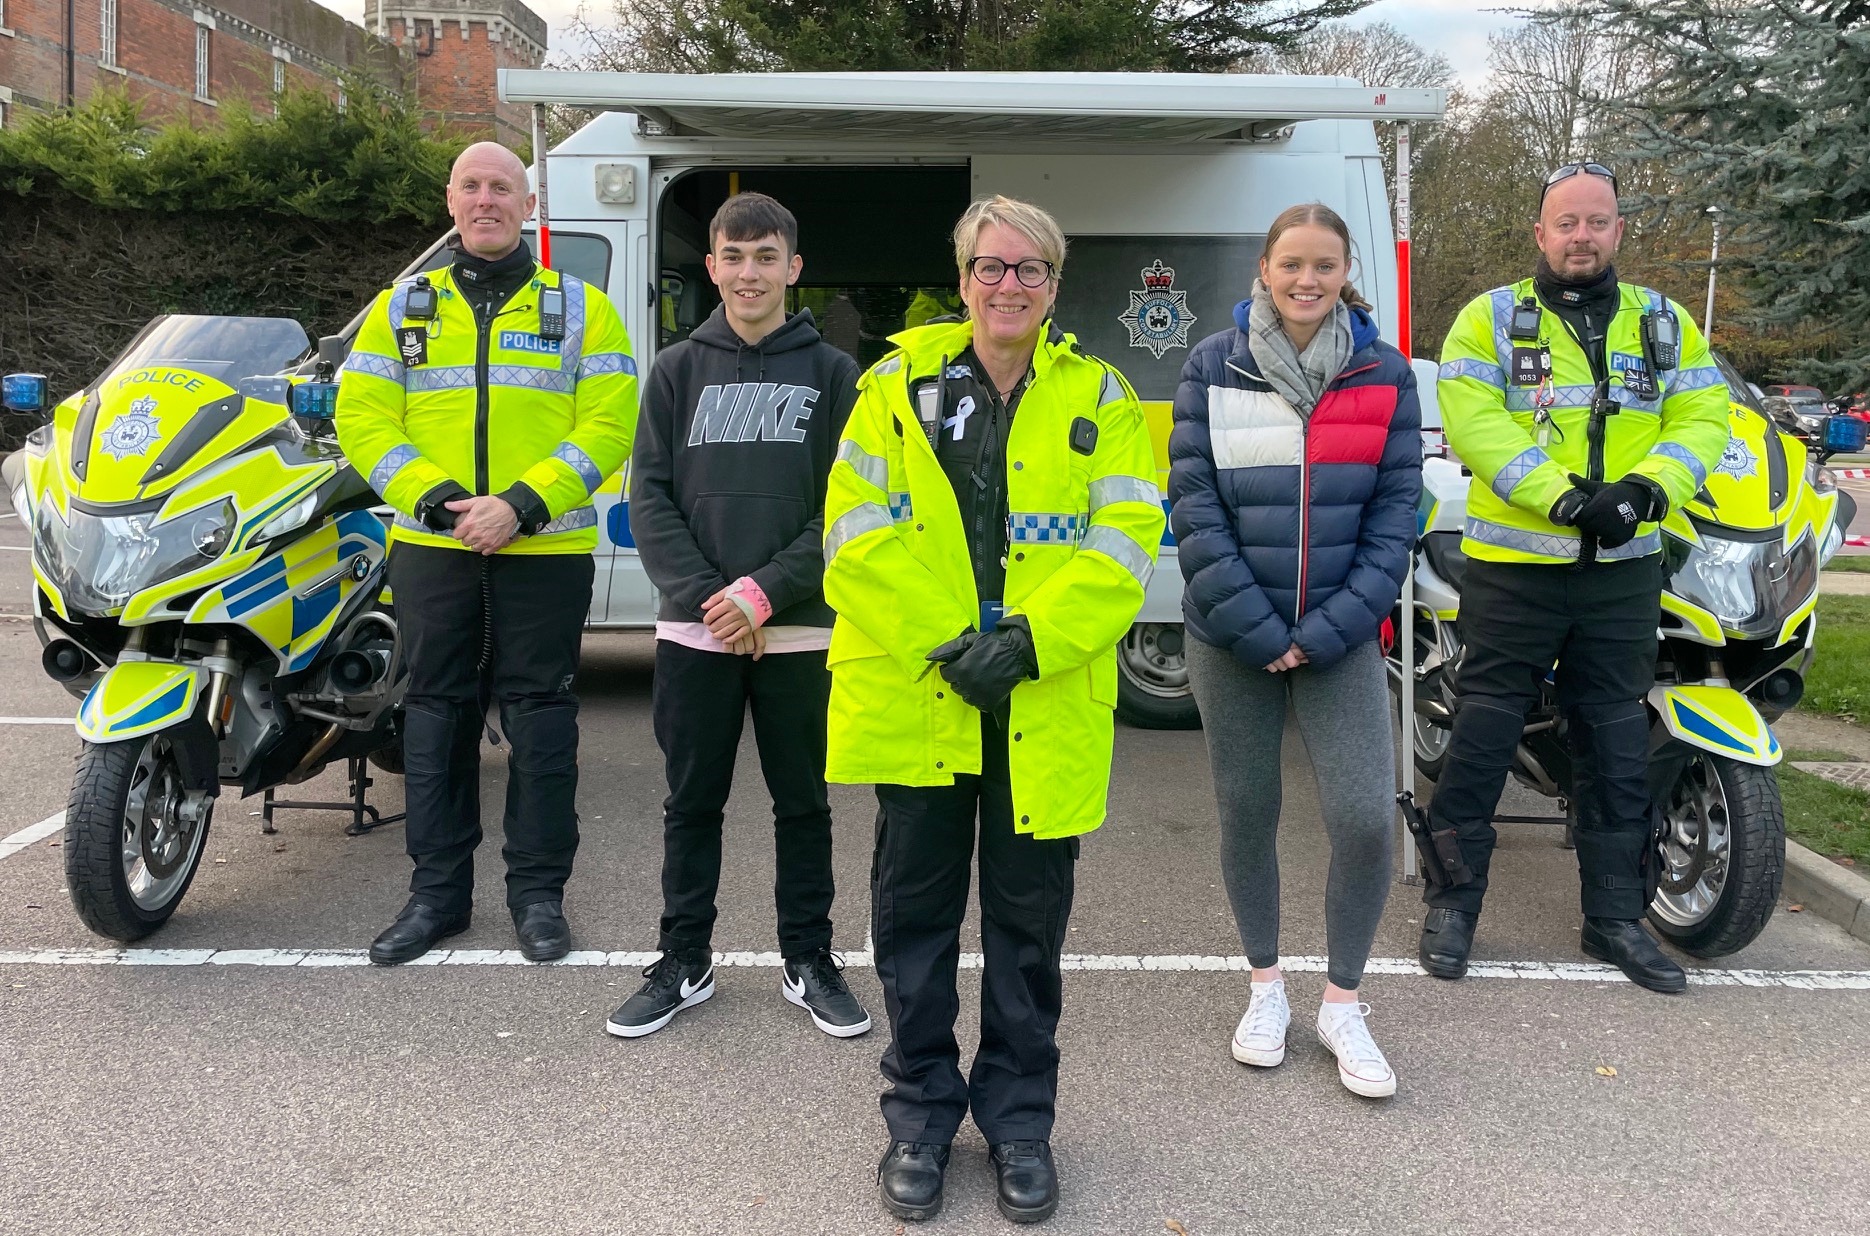 Public service students work with Suffolk Constabulary on drink driving campaign